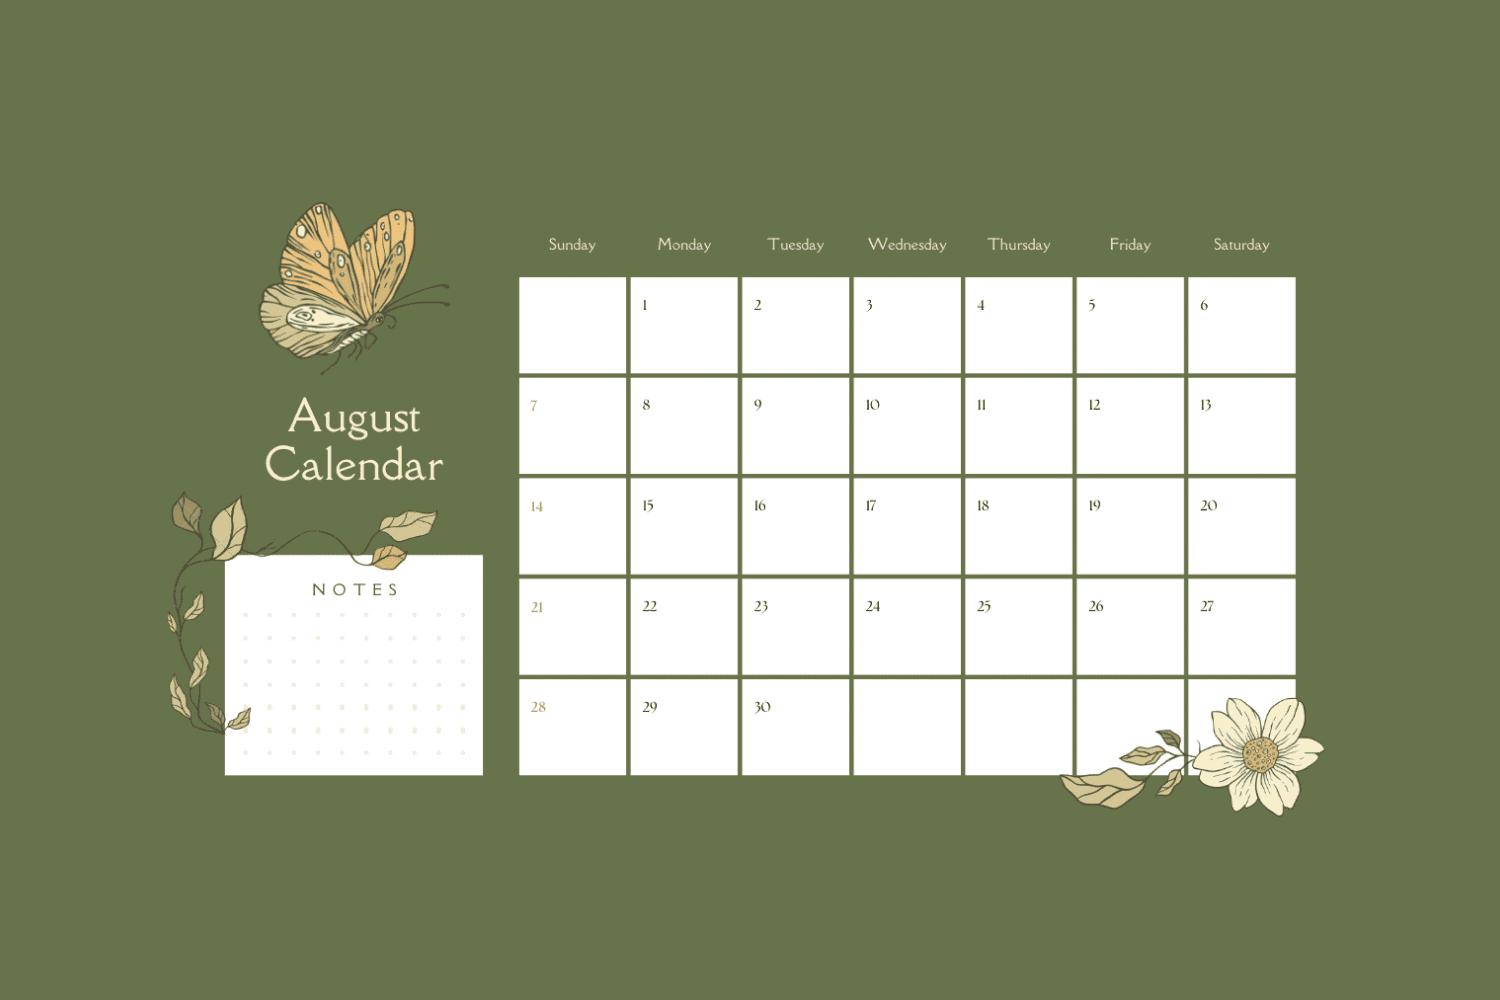 Calendar with images of butterflies and flowers on a green background.